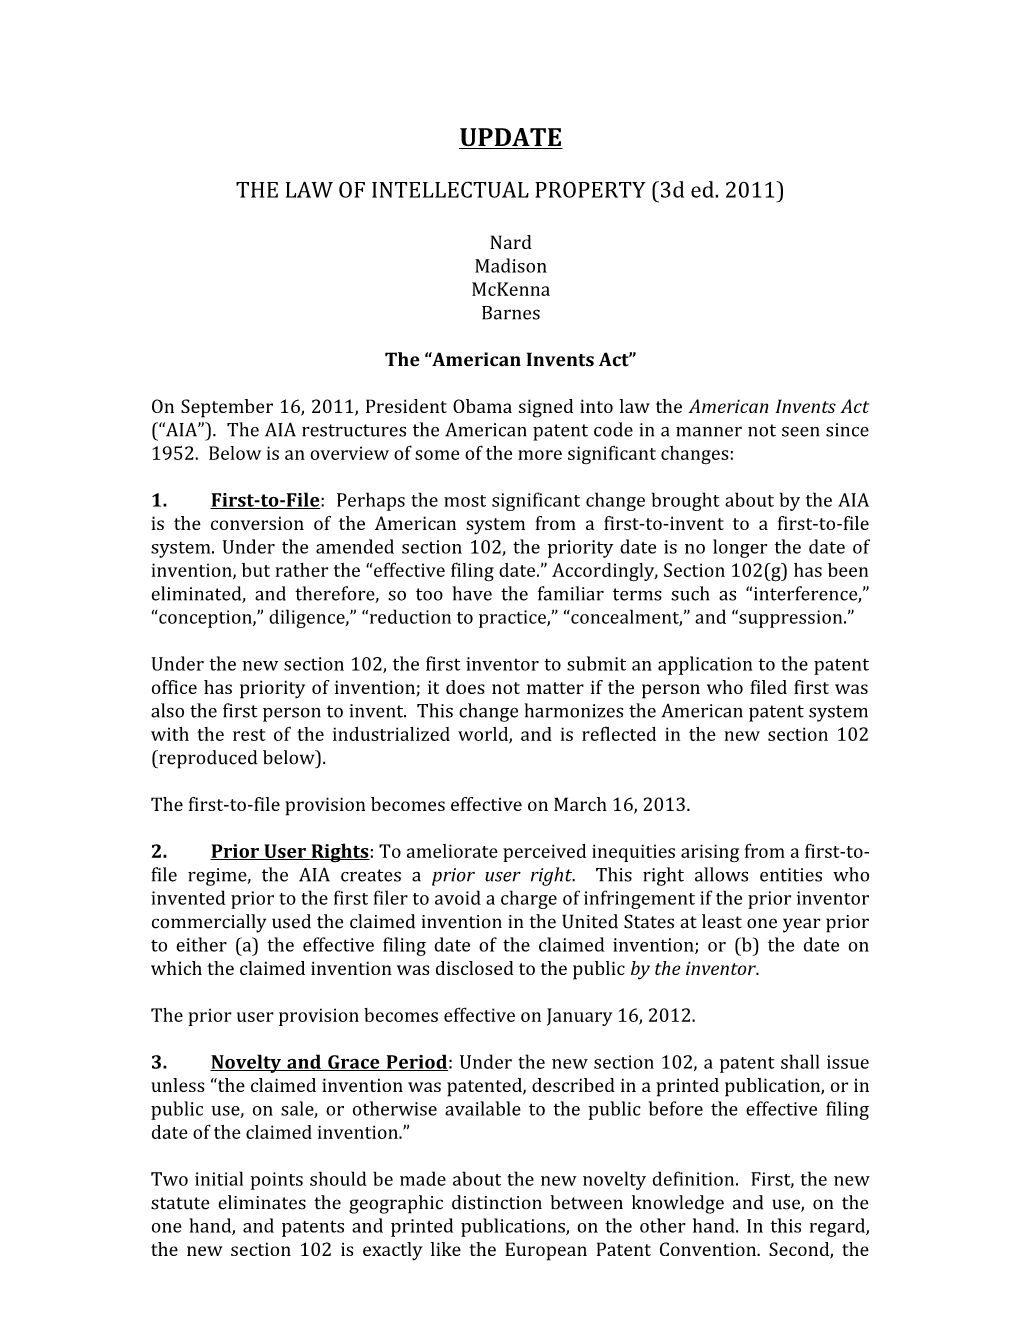 THE LAW of INTELLECTUAL PROPERTY (3D Ed. 2011)